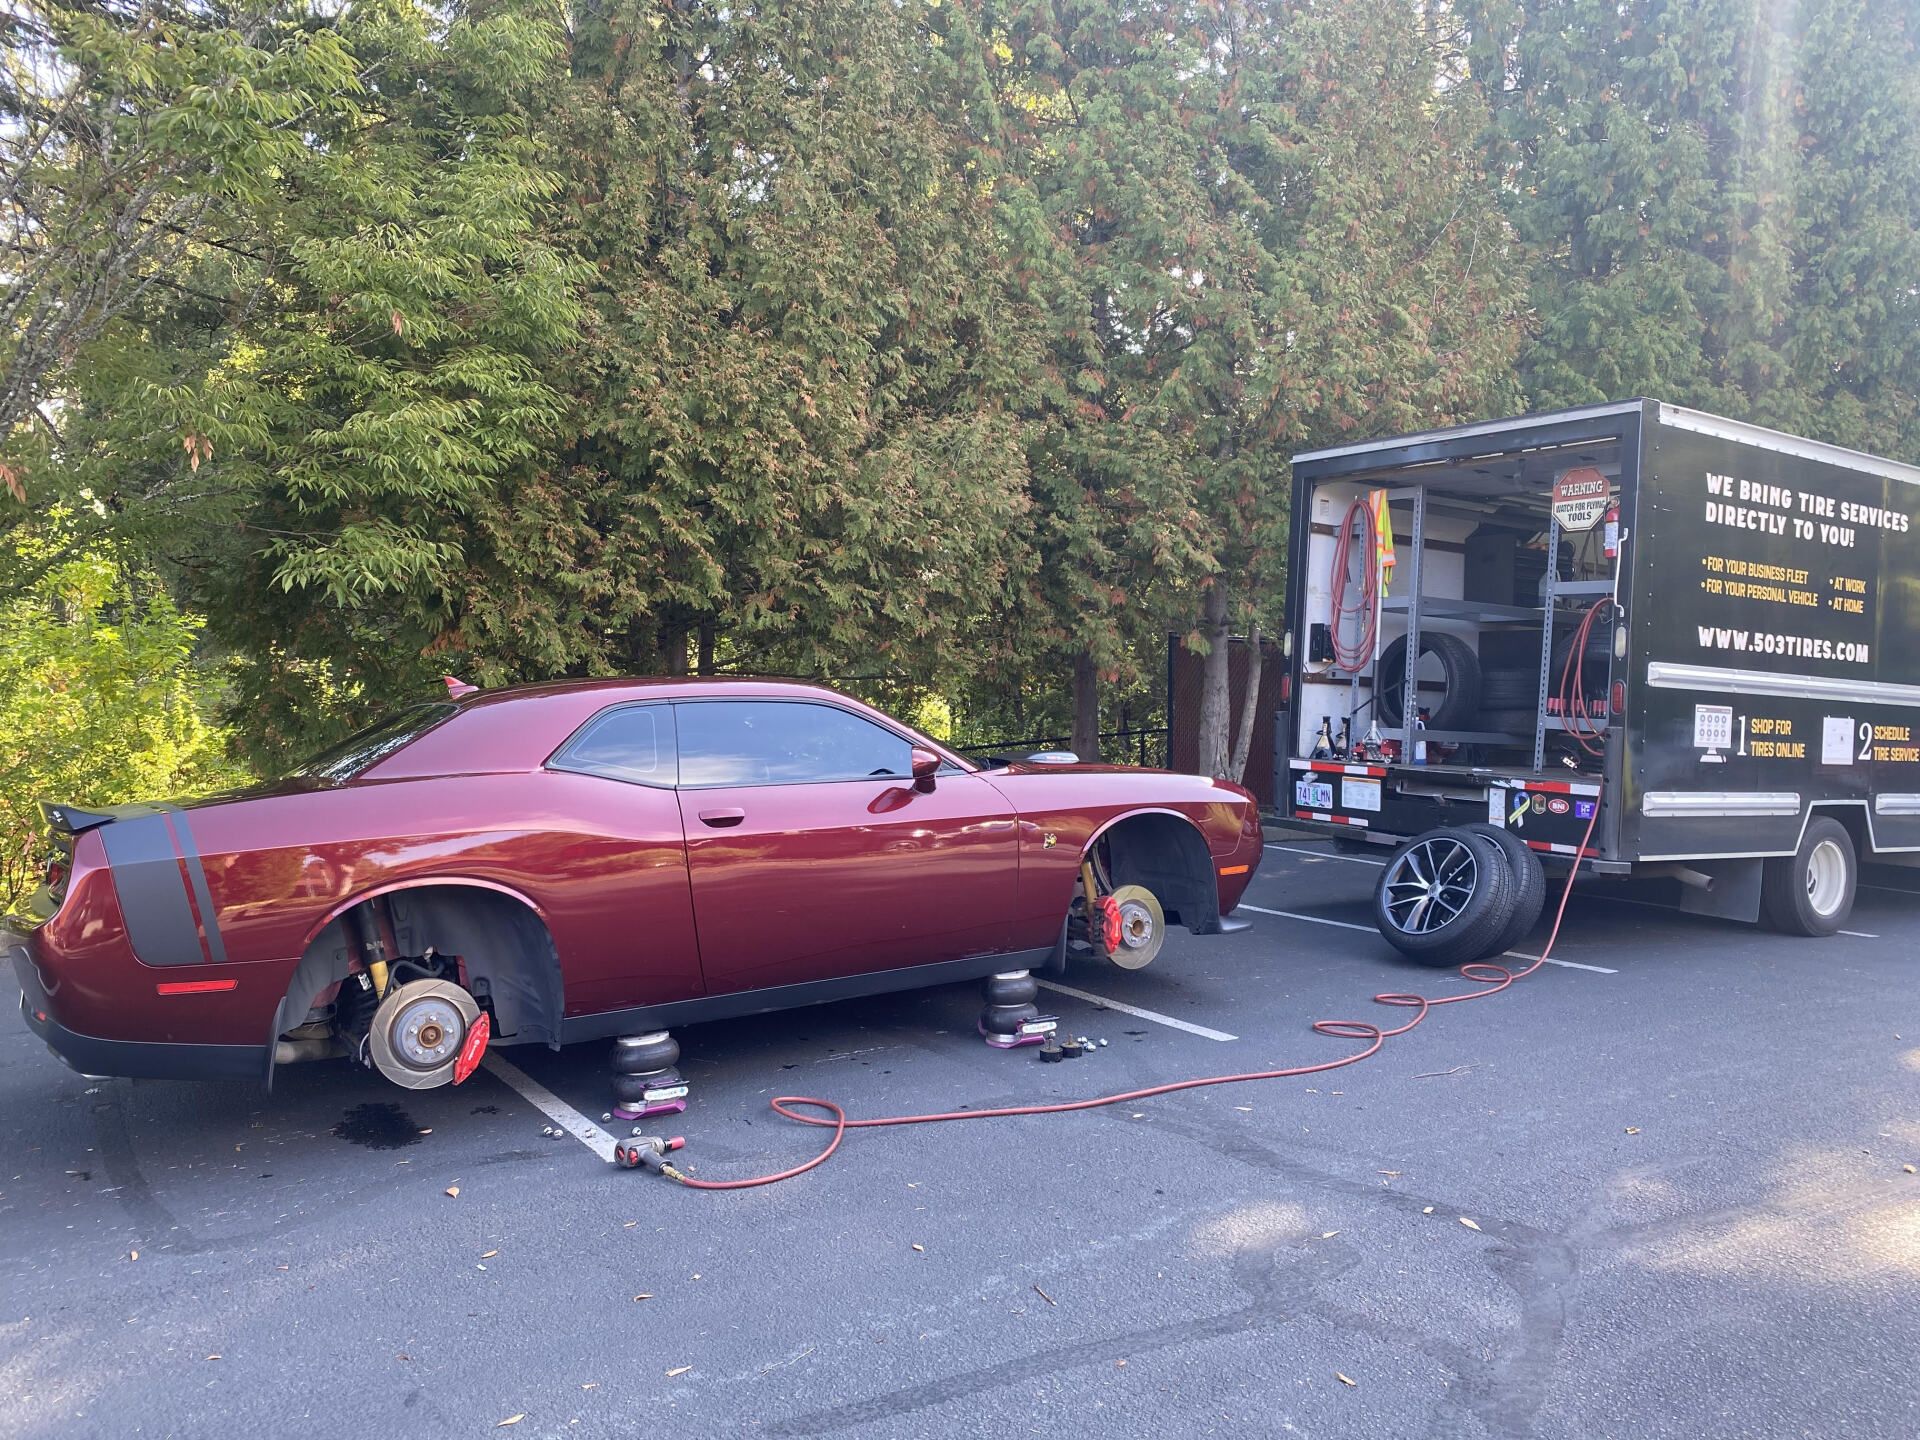 Dodge Charger getting a new set of tires.